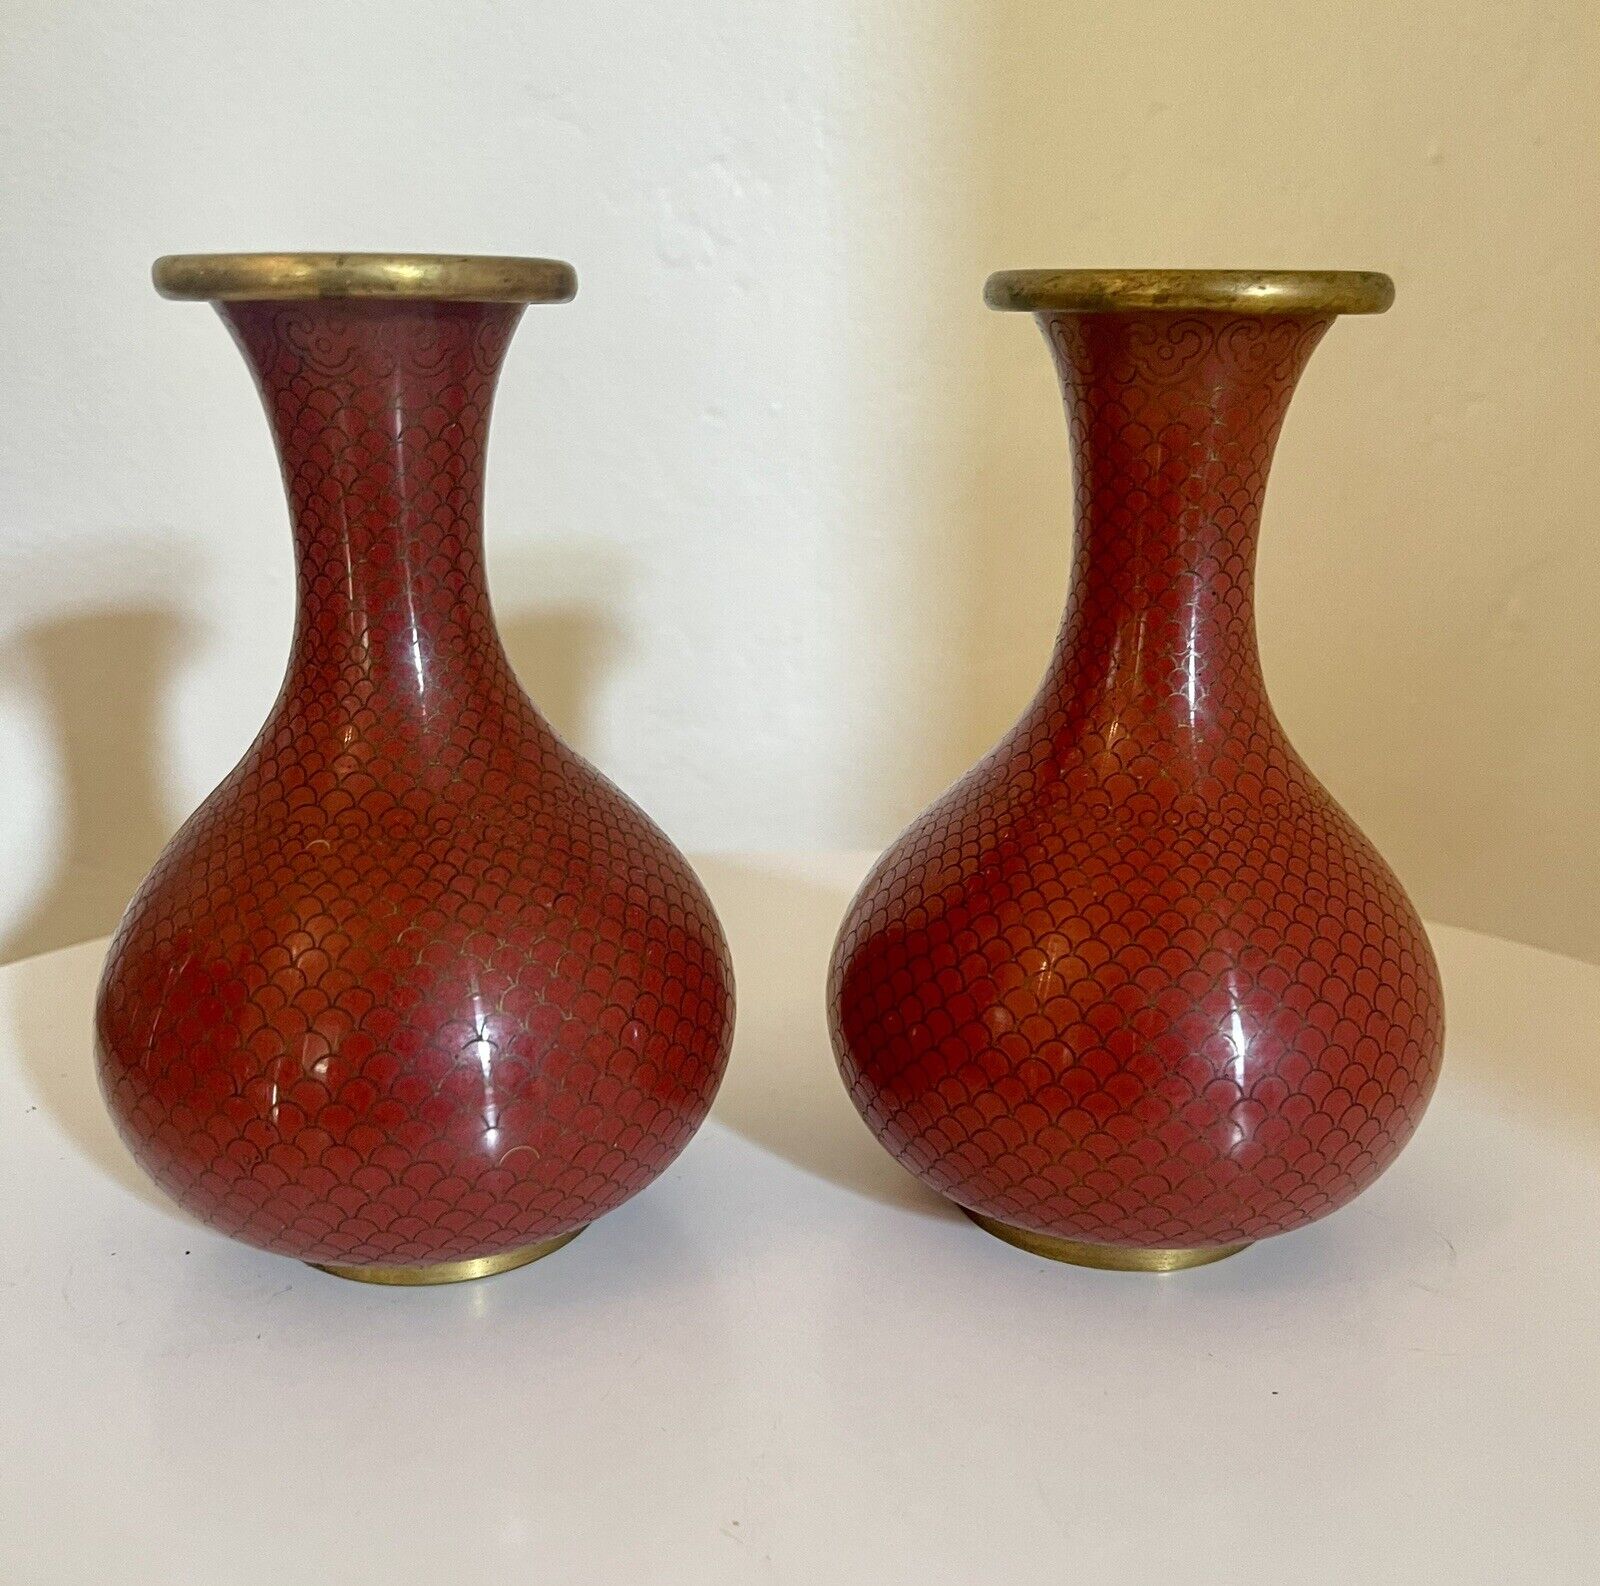 Pair of Chinese Antique Cloisonné Fish Scale Vases Rust Red